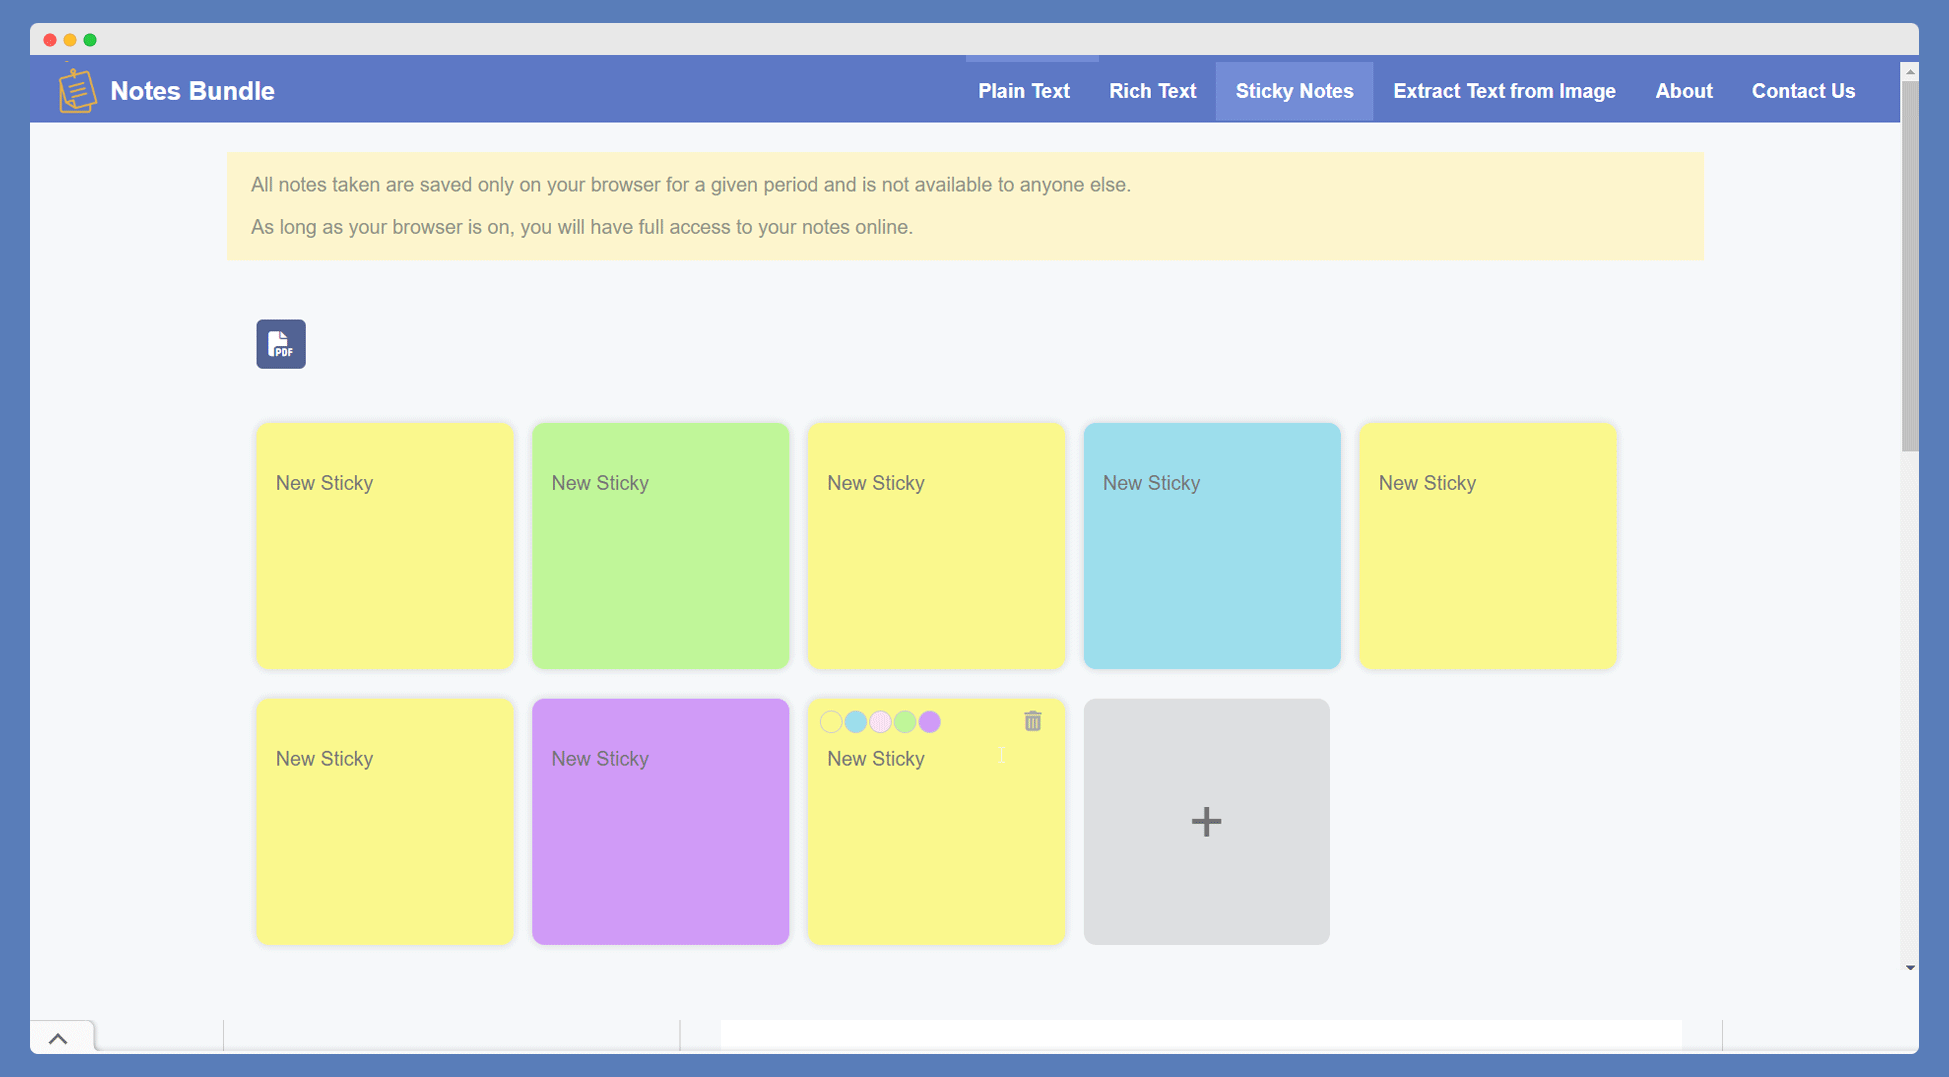 Sticky Notes example created with Notes Bundle